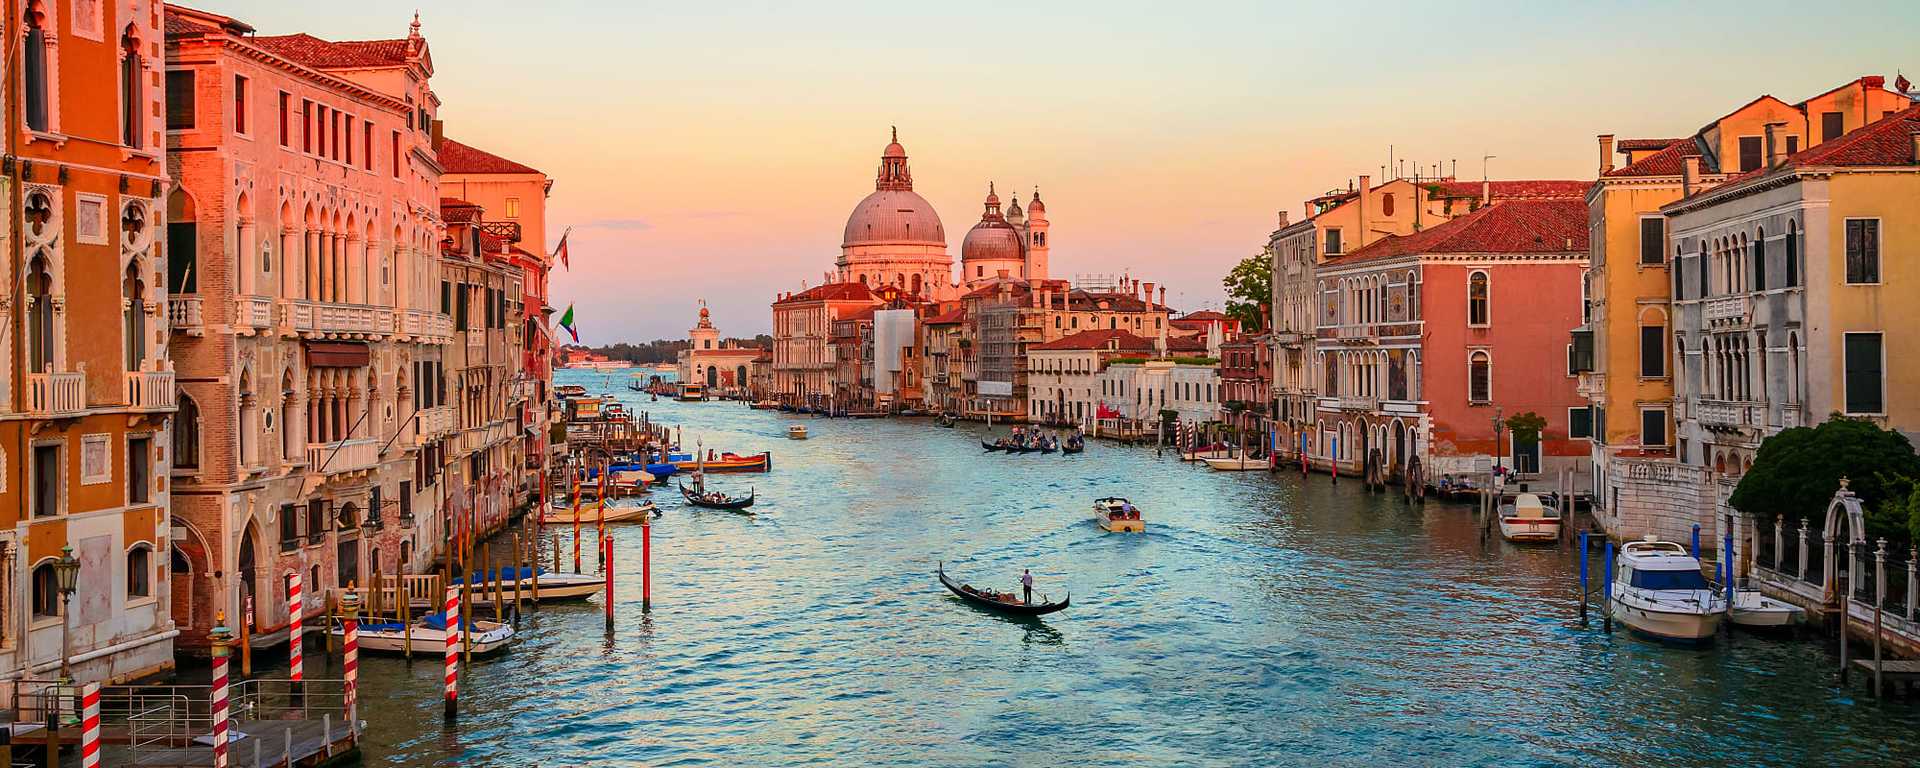 Sunset over the Grand Canal in Venice, Italy